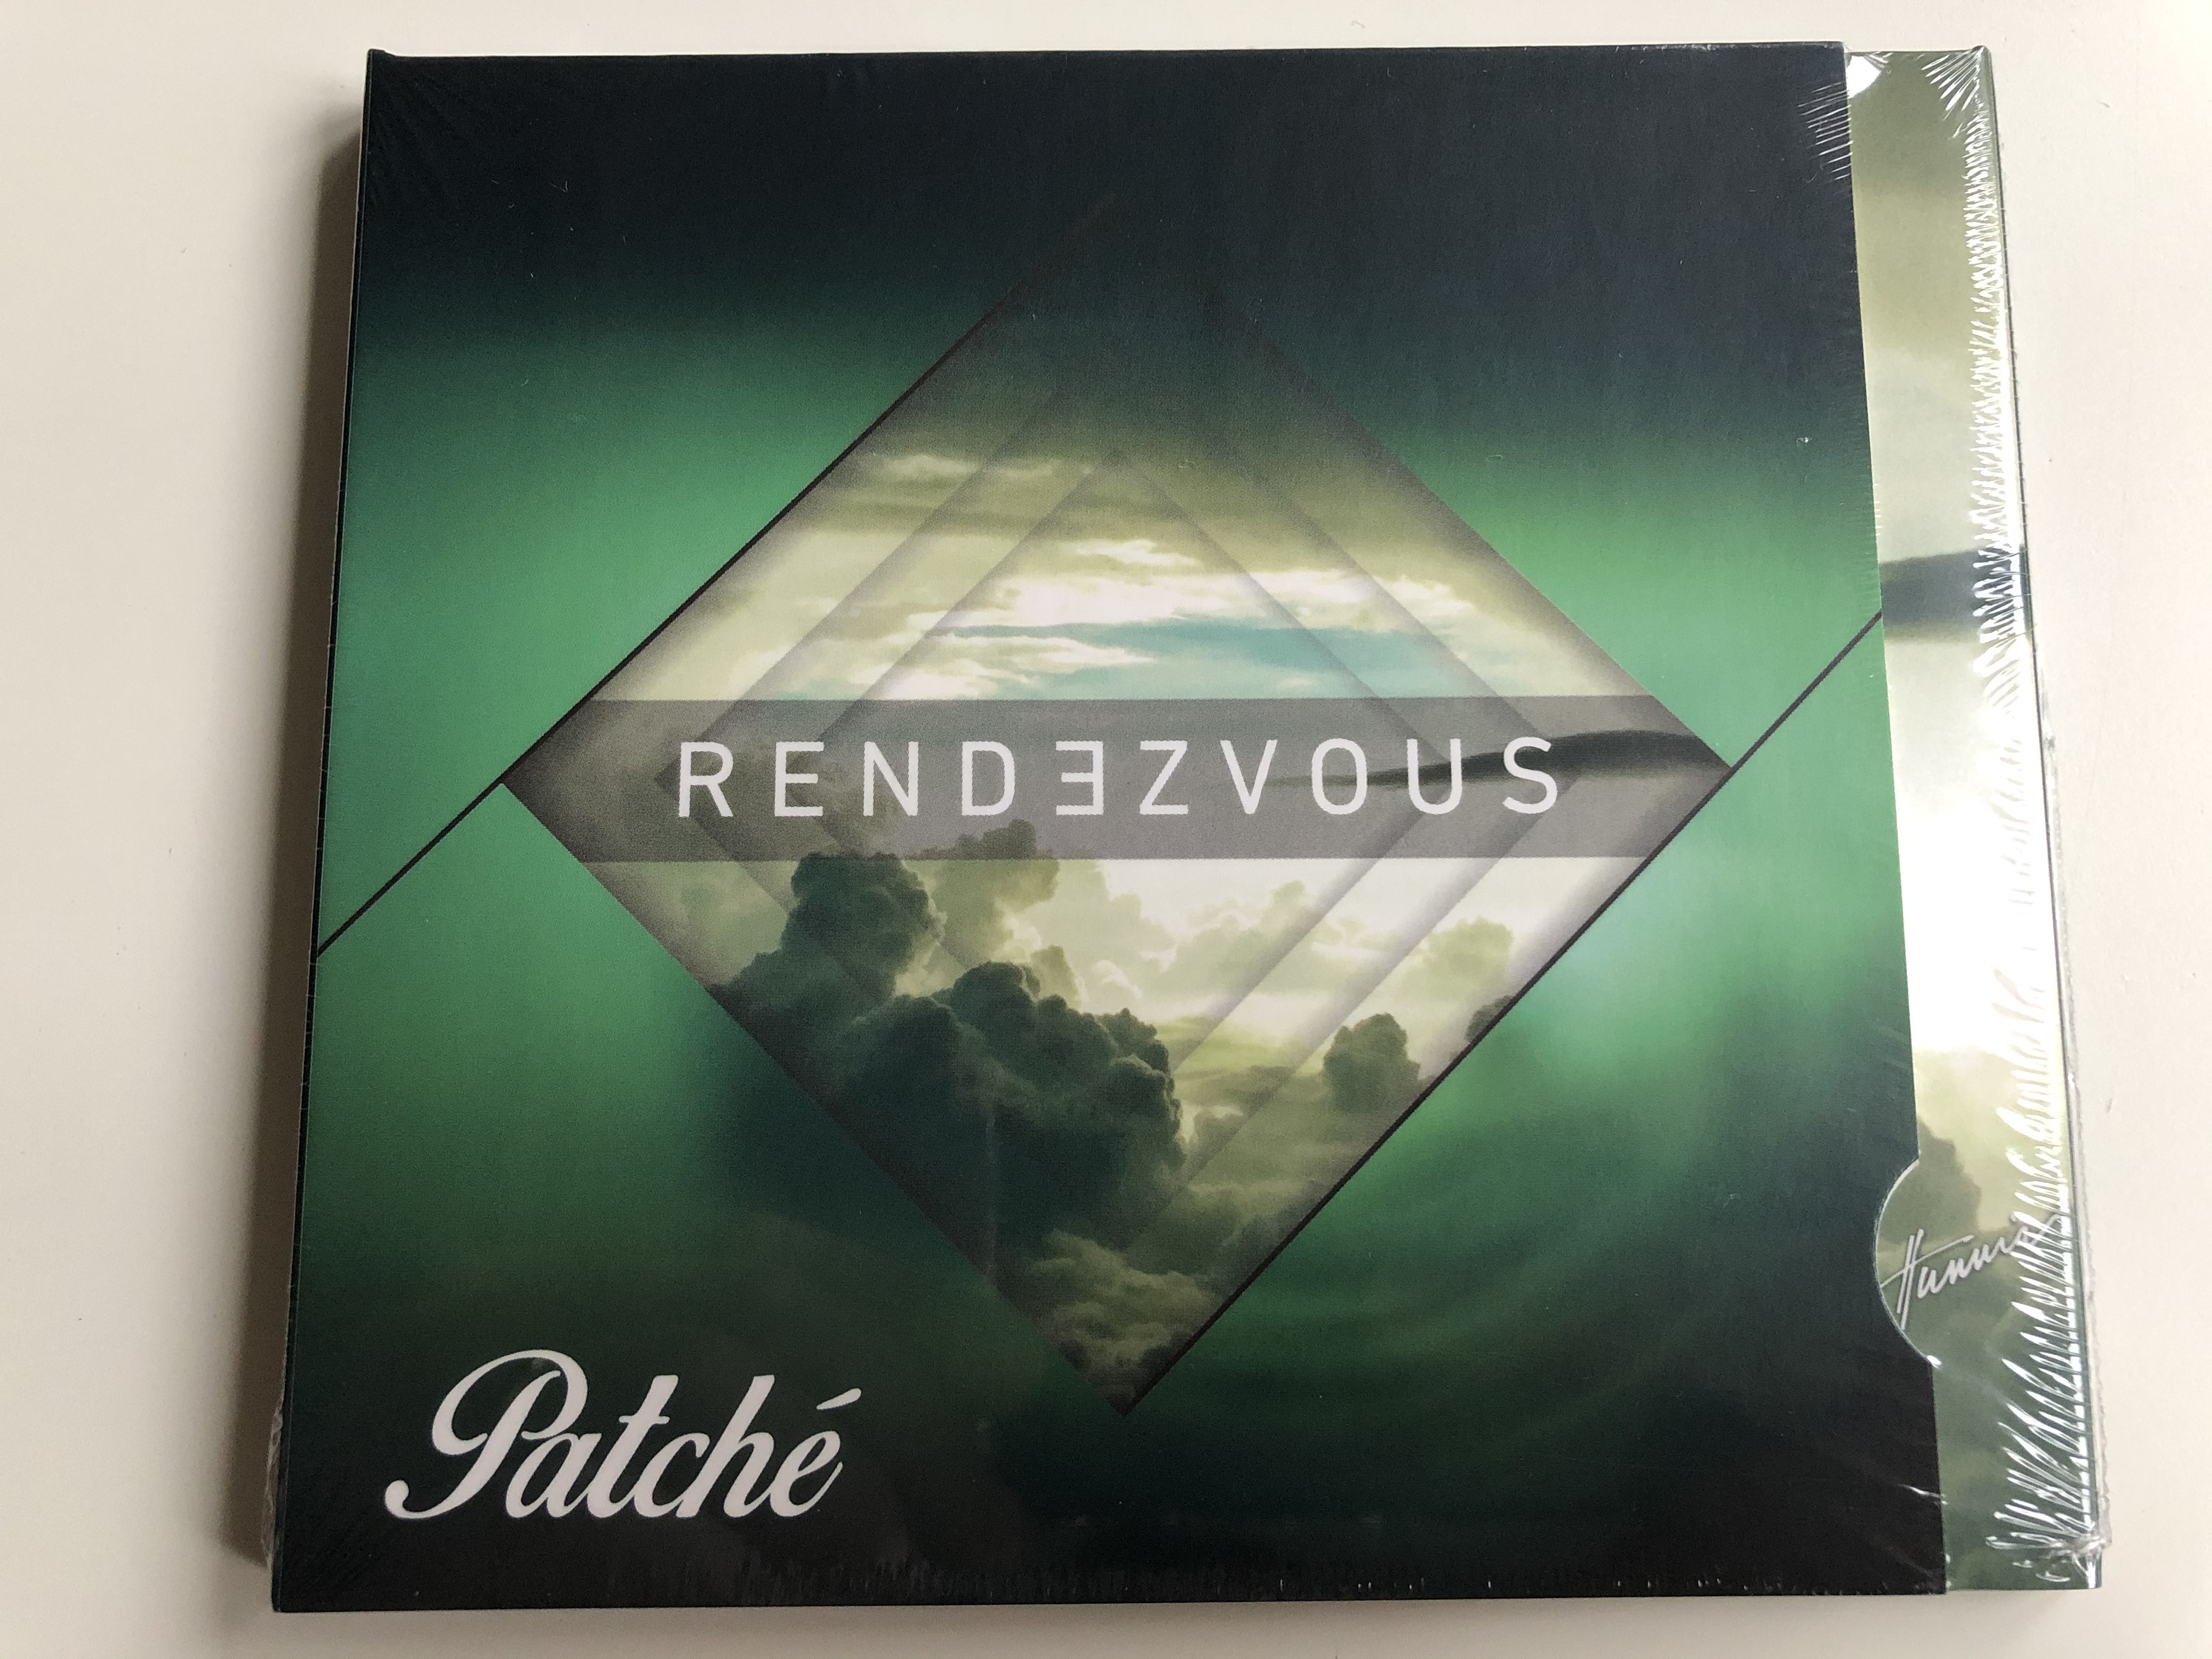 rendezvous-patche-hunnia-records-film-production-audio-cd-2017-hrcd1709-1-.jpg